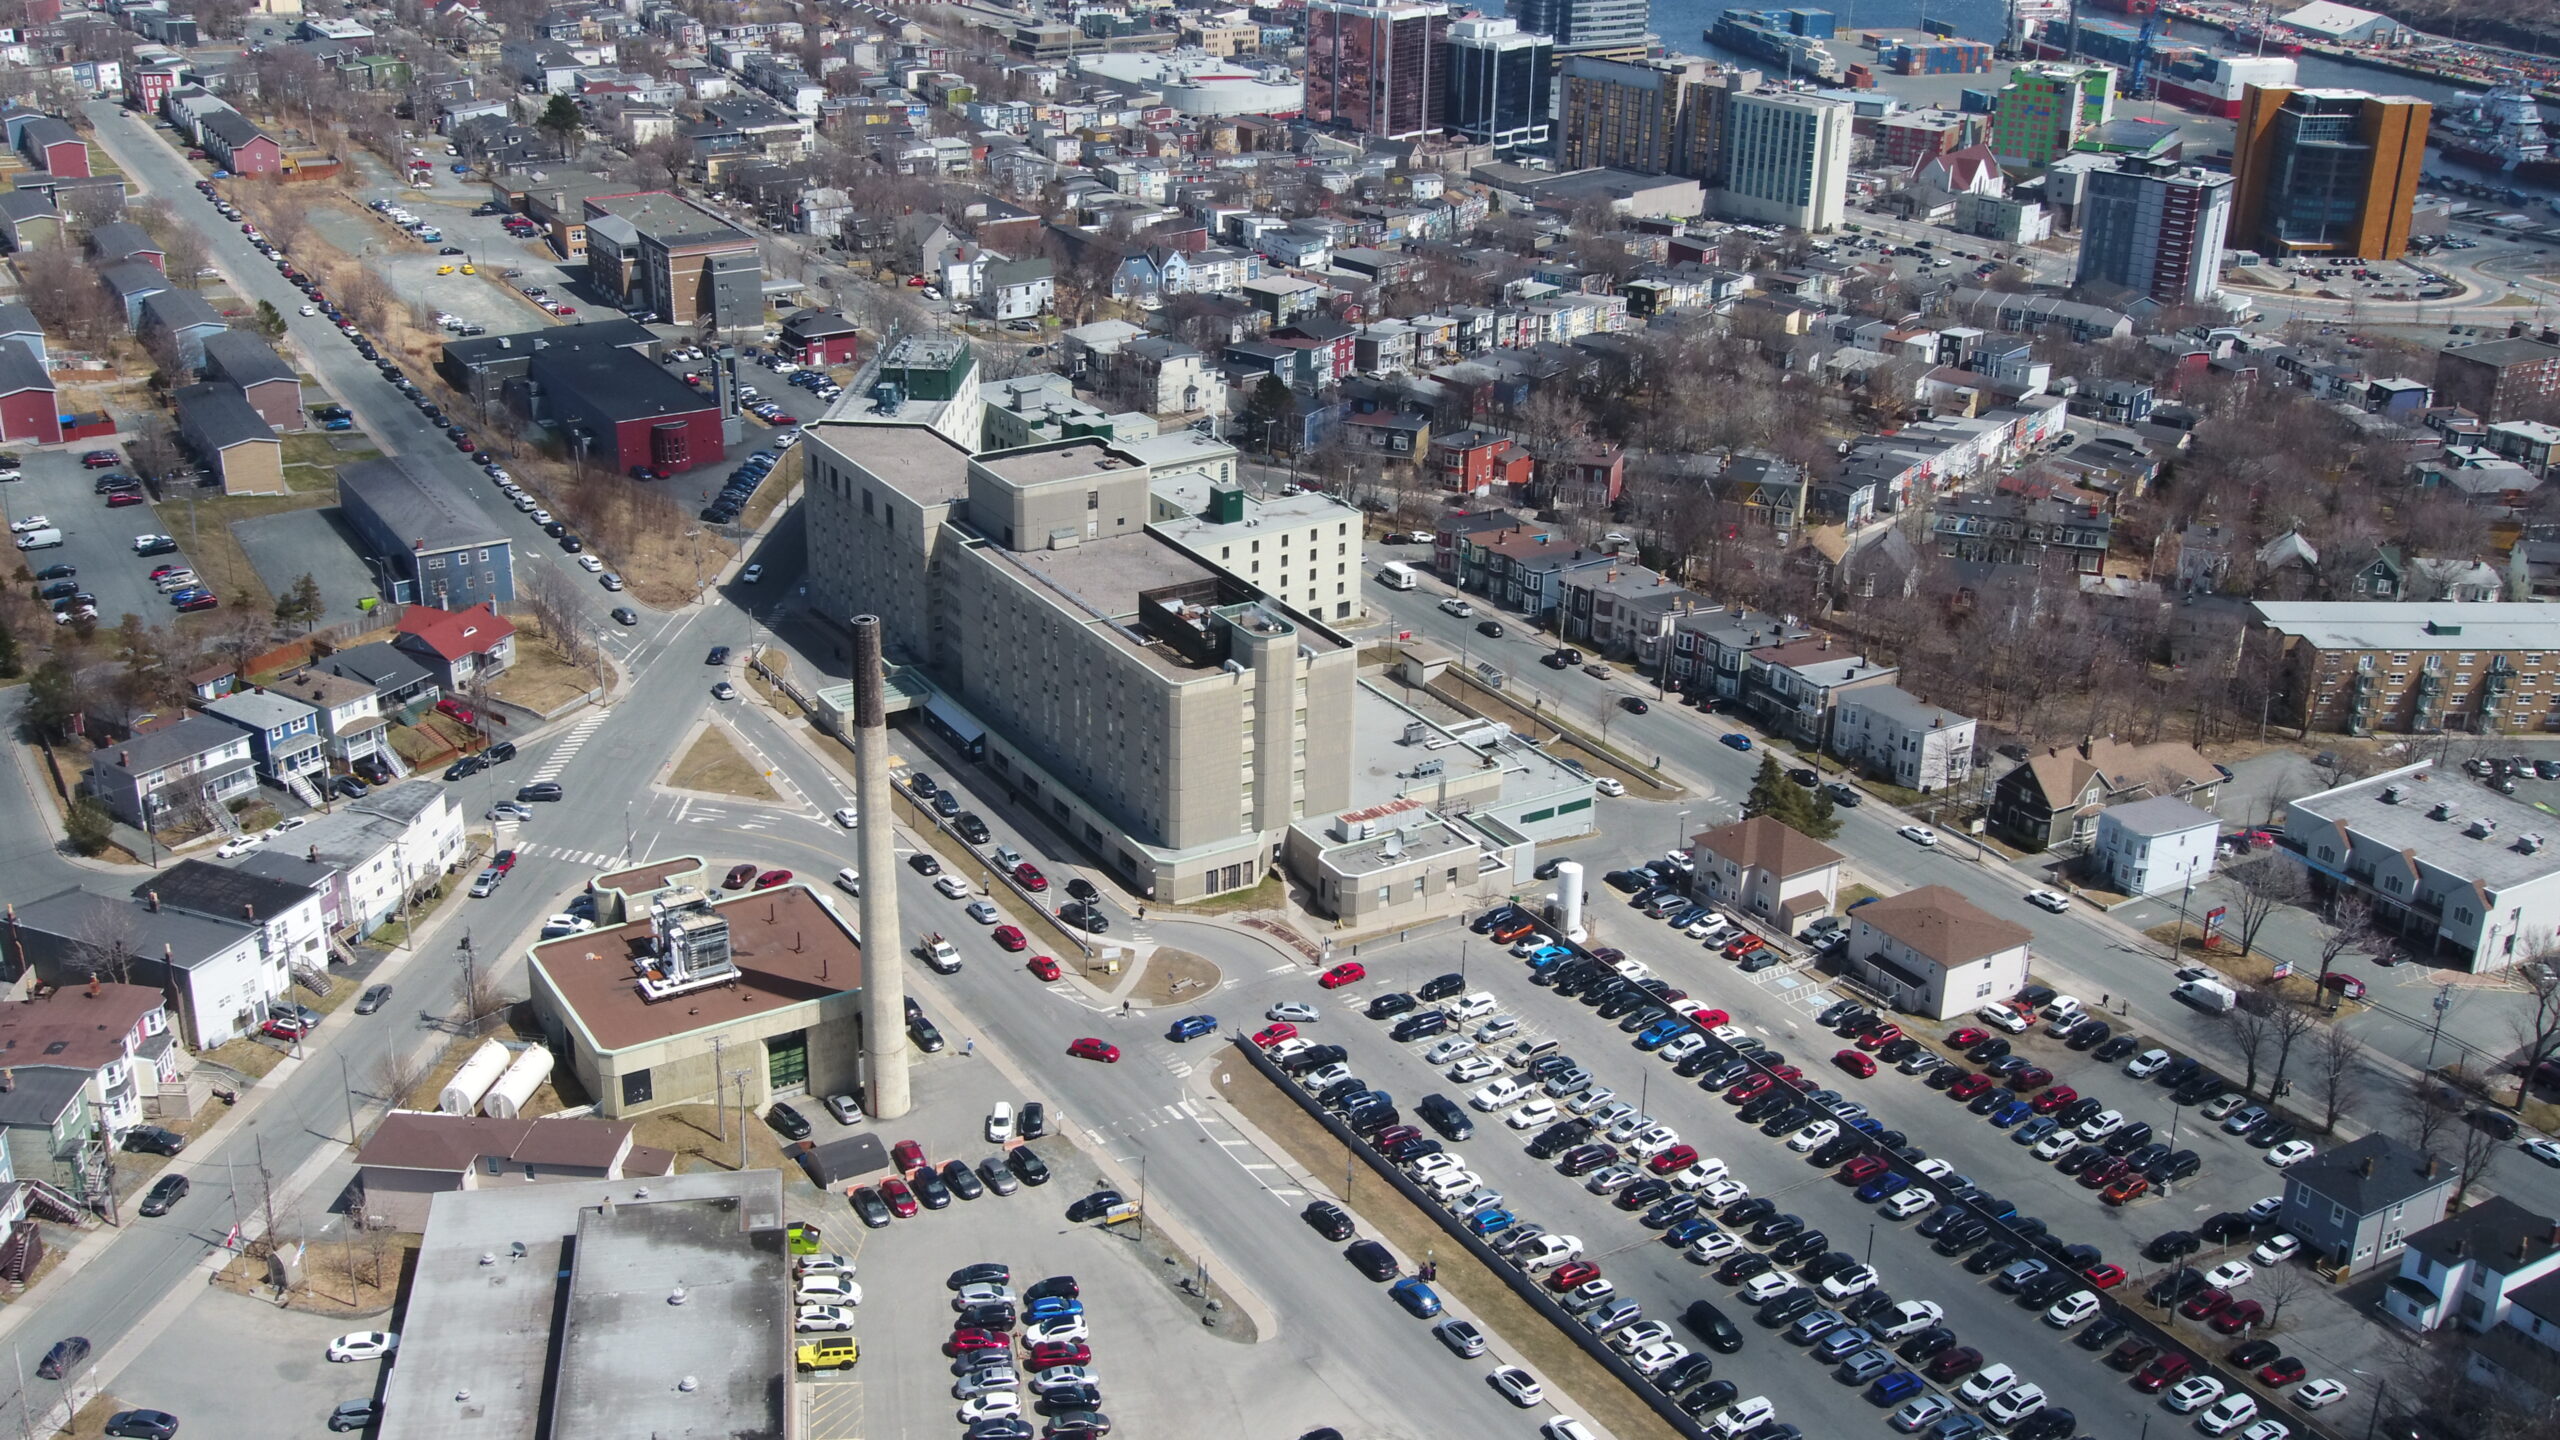 https://www.concordparking.com/wp-content/uploads/2023/08/St-Clares-full-lot-scaled.jpg